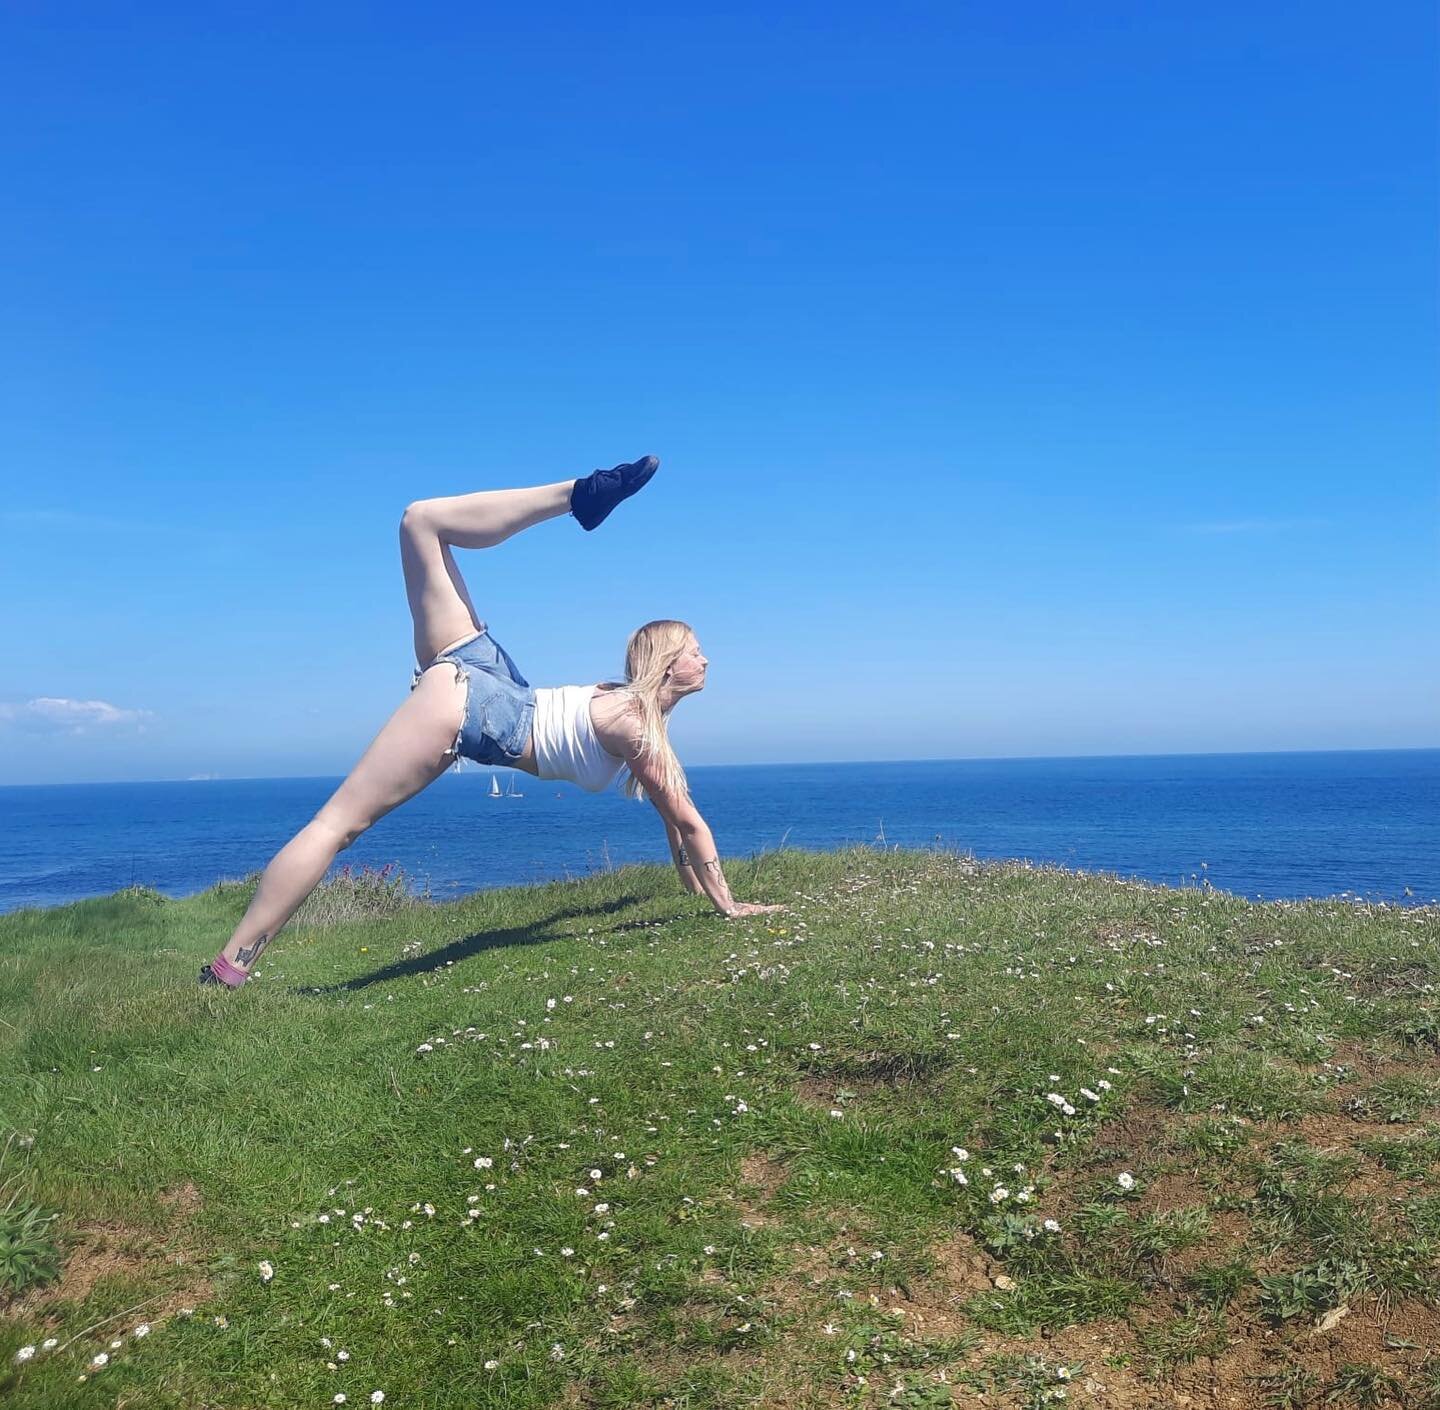 Els, can you take a photo of me in a Yoga pose on that little cliff bit over there? Thanks @mywastelessjourney 

#yoga #yogaposes #swanage #dorset #cliff #strikeapose #tantime #sunshine